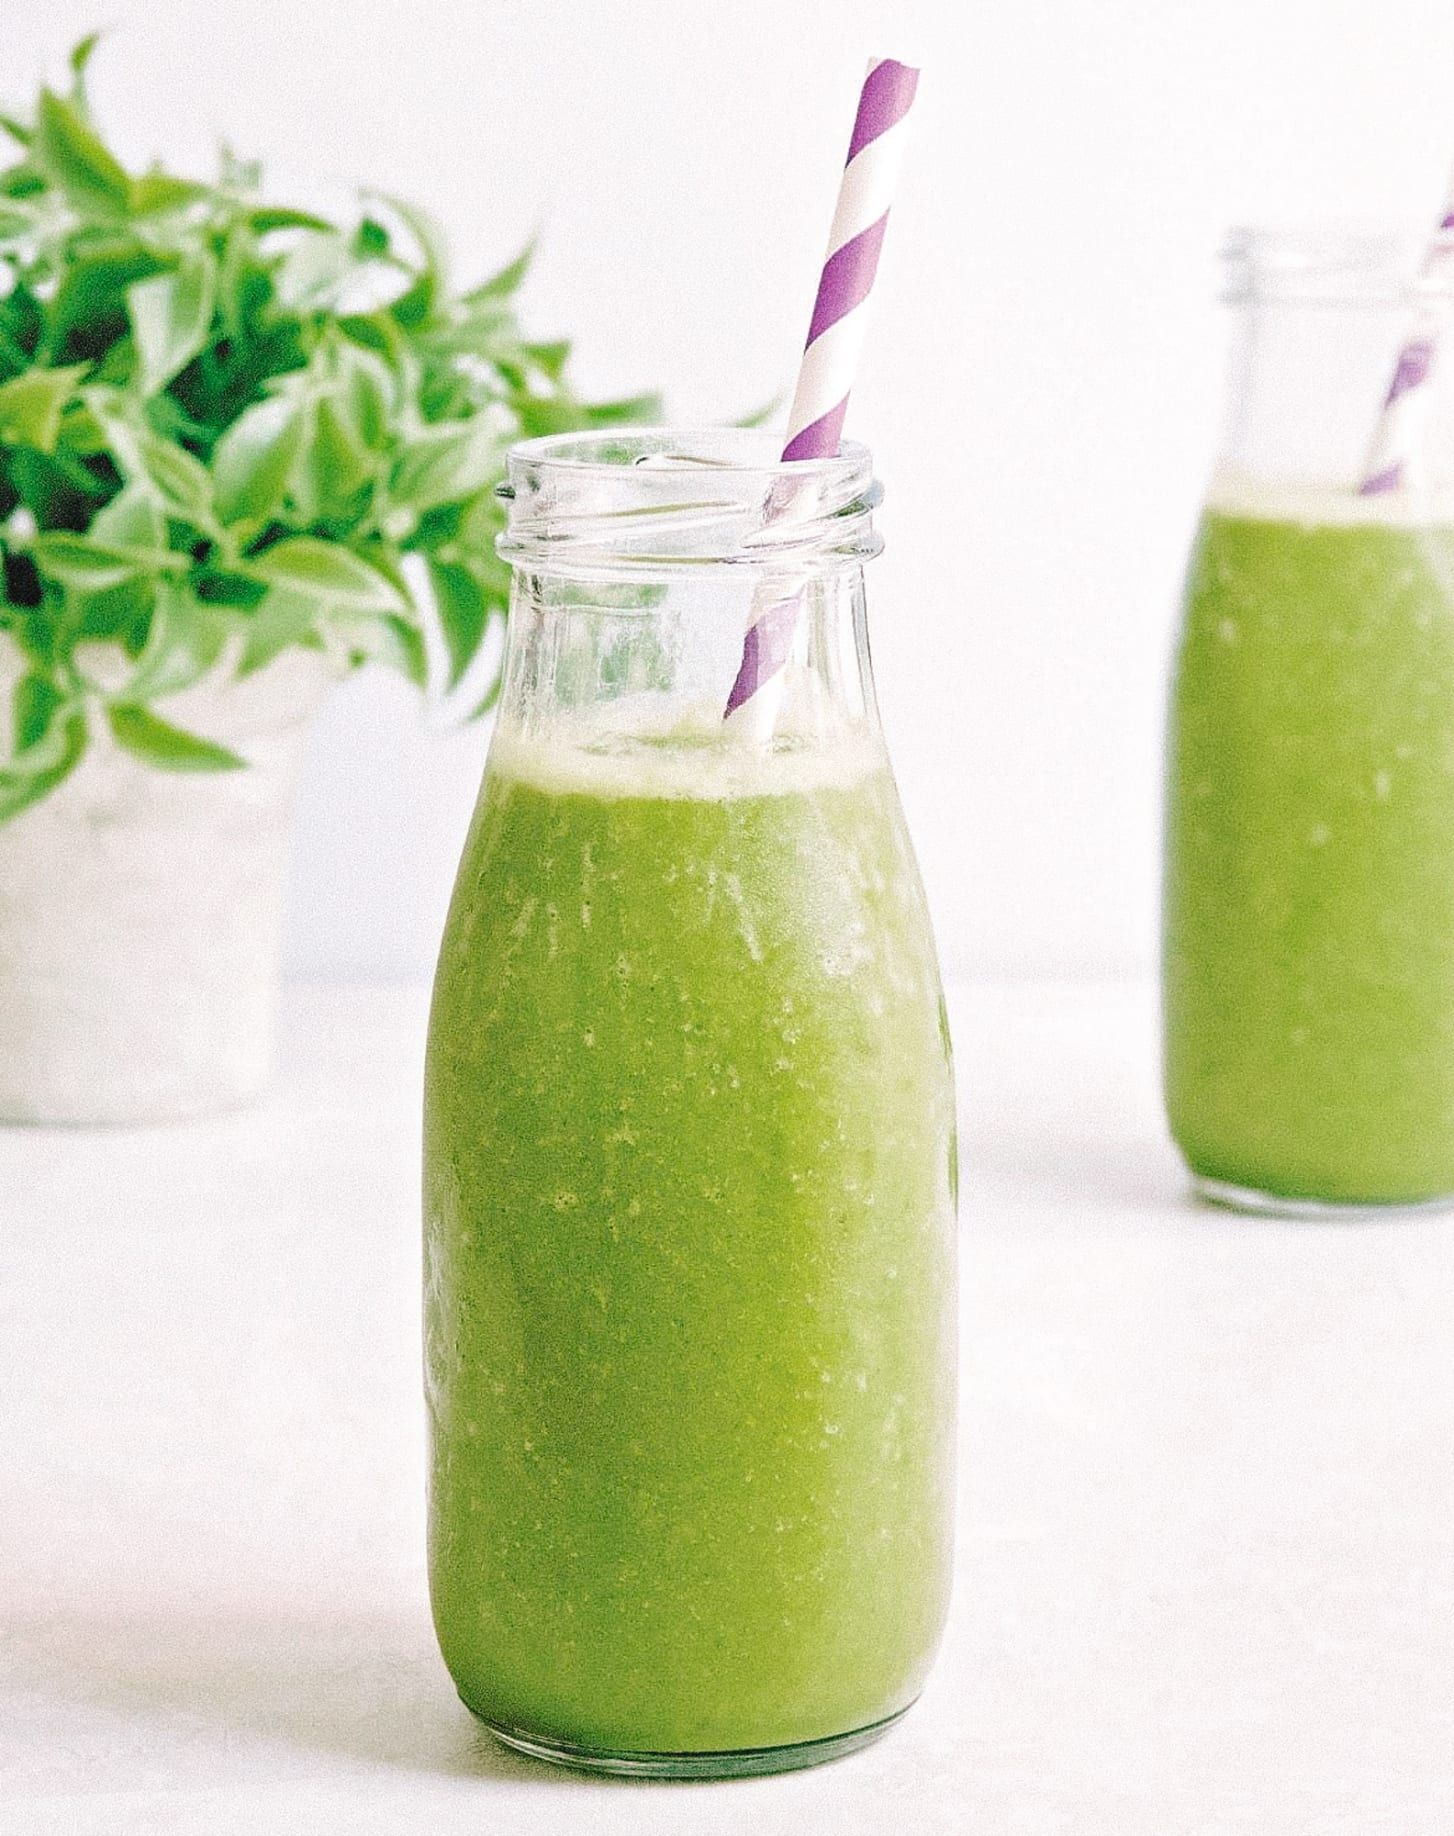 3 Morning Smoothies To Give You Focus, Energy &  Intention